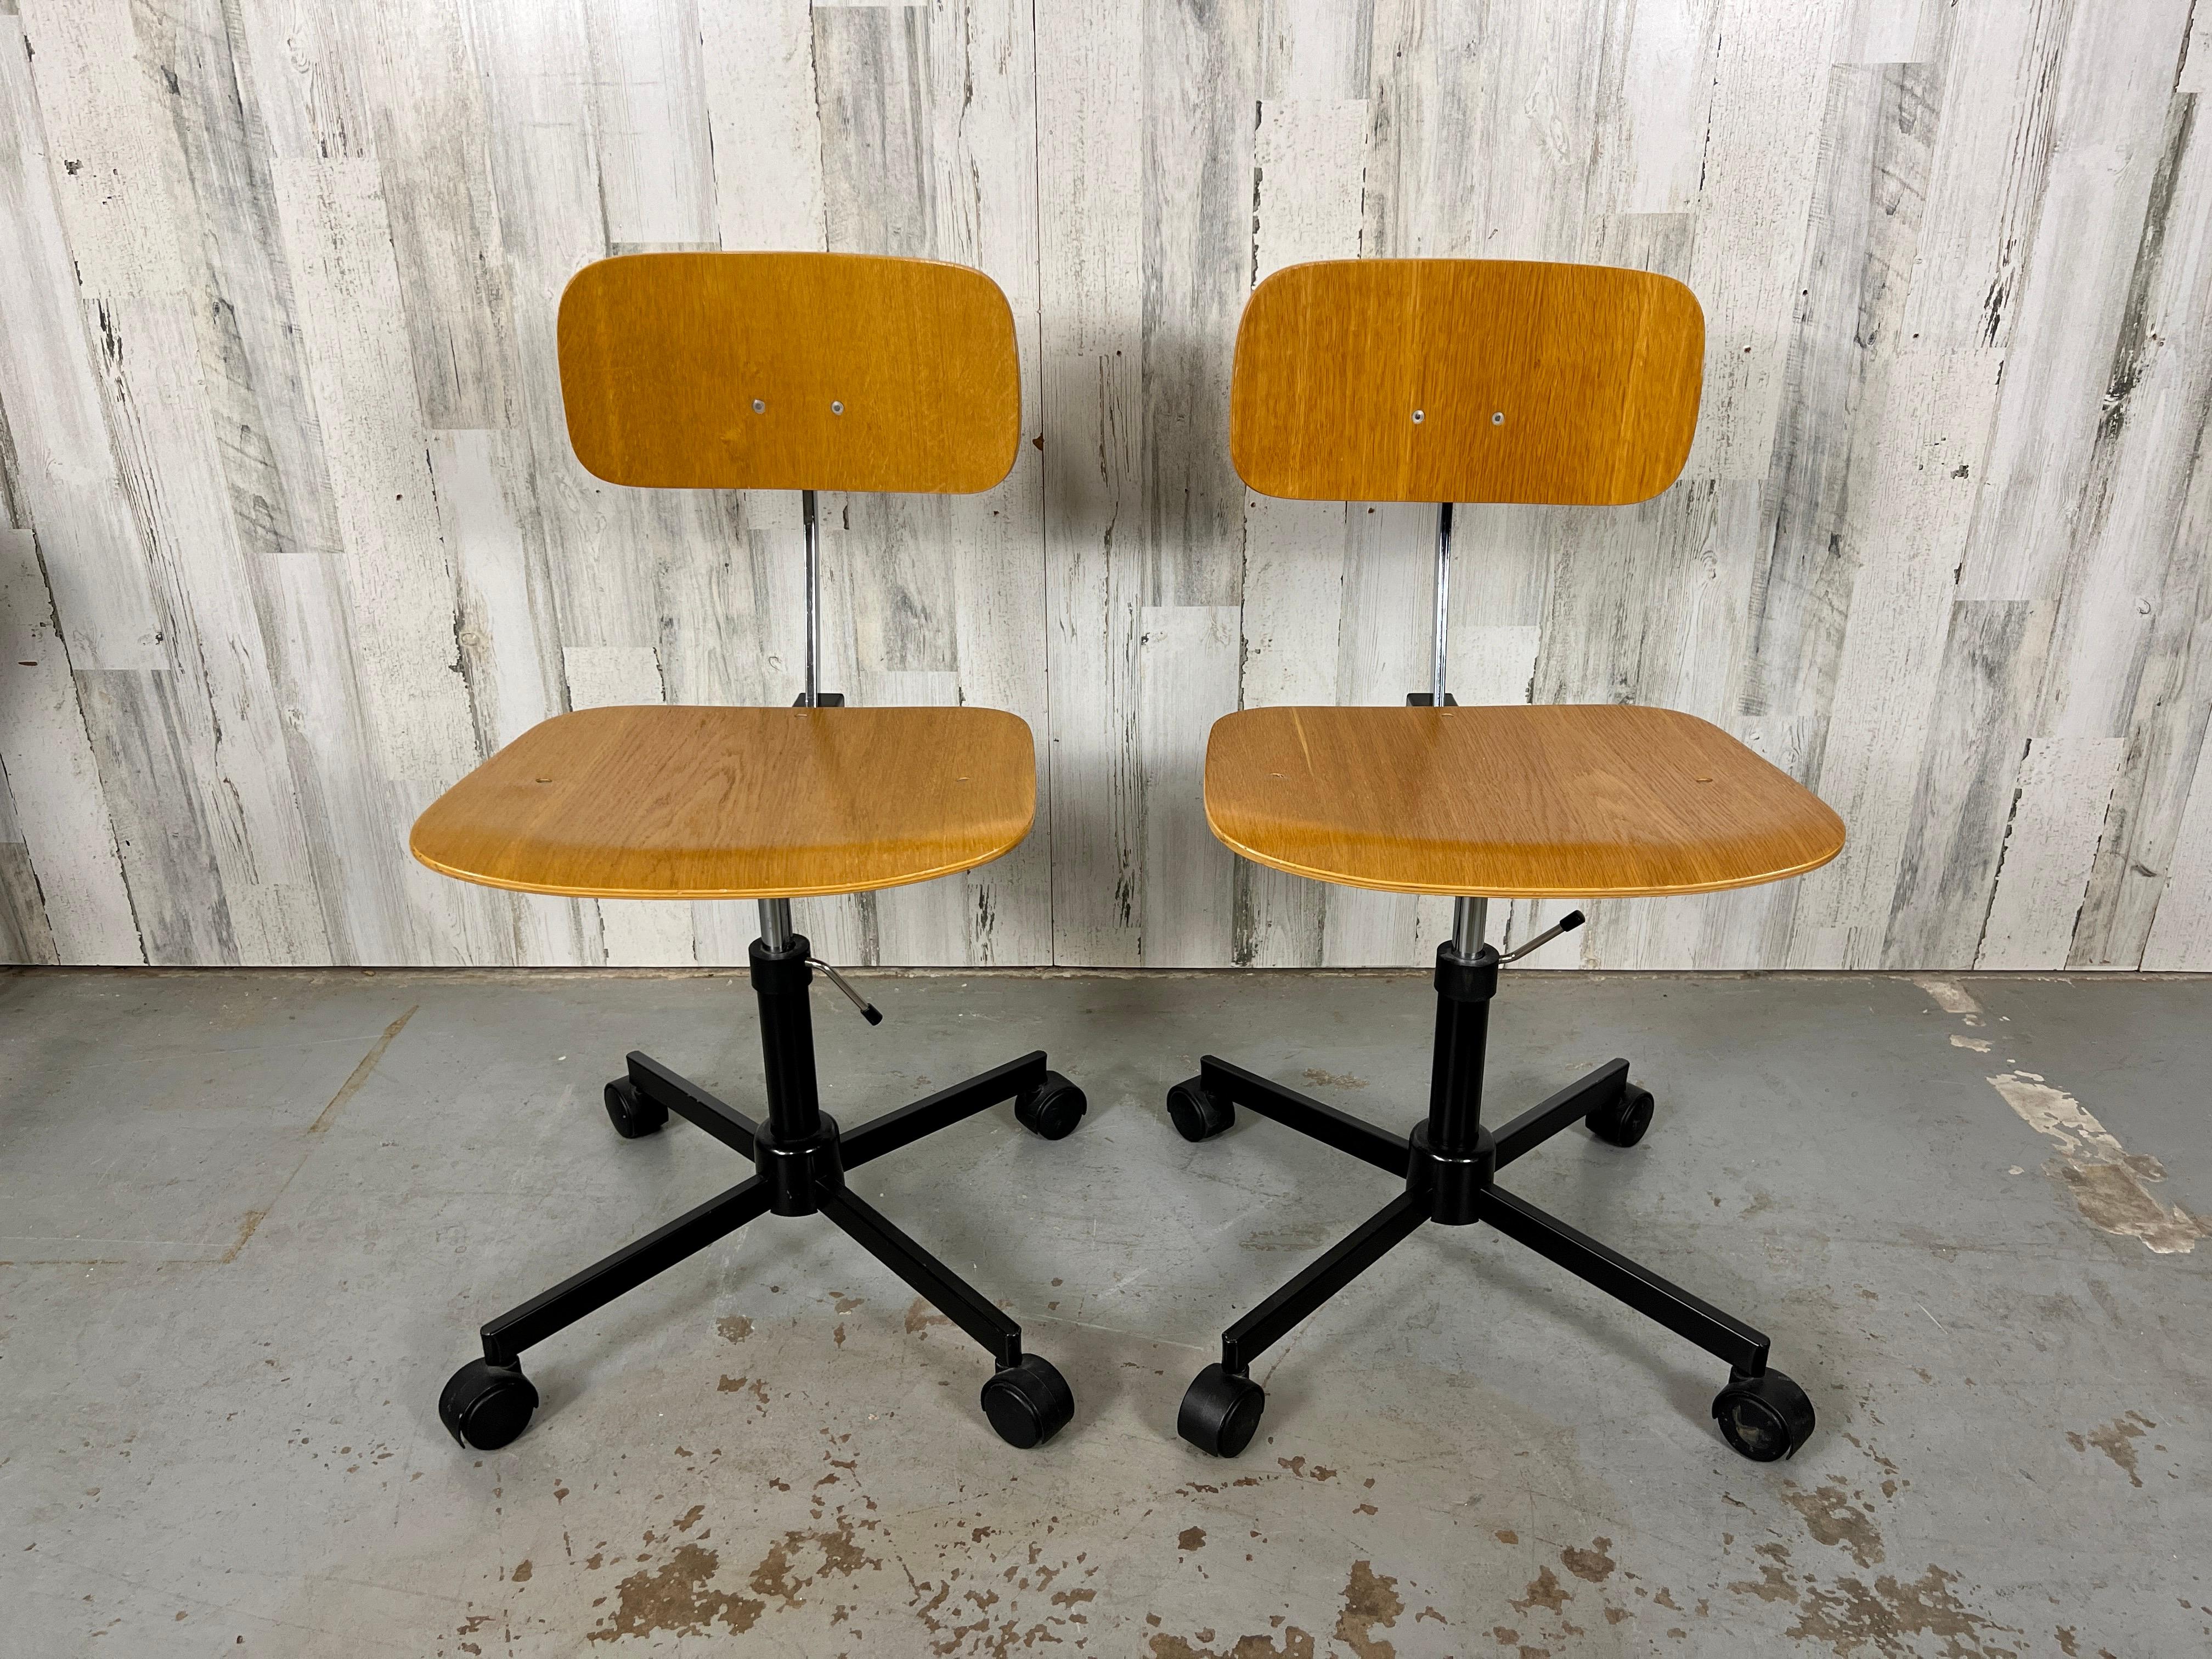  Danish Modern office chair design by architect and designer Jorgen Rasmussen for Engelbrechts, the Kevi chair (1965) became popular chair for the home or office based on a simple idea: the better you sit, the more you get done. Seat max.height is